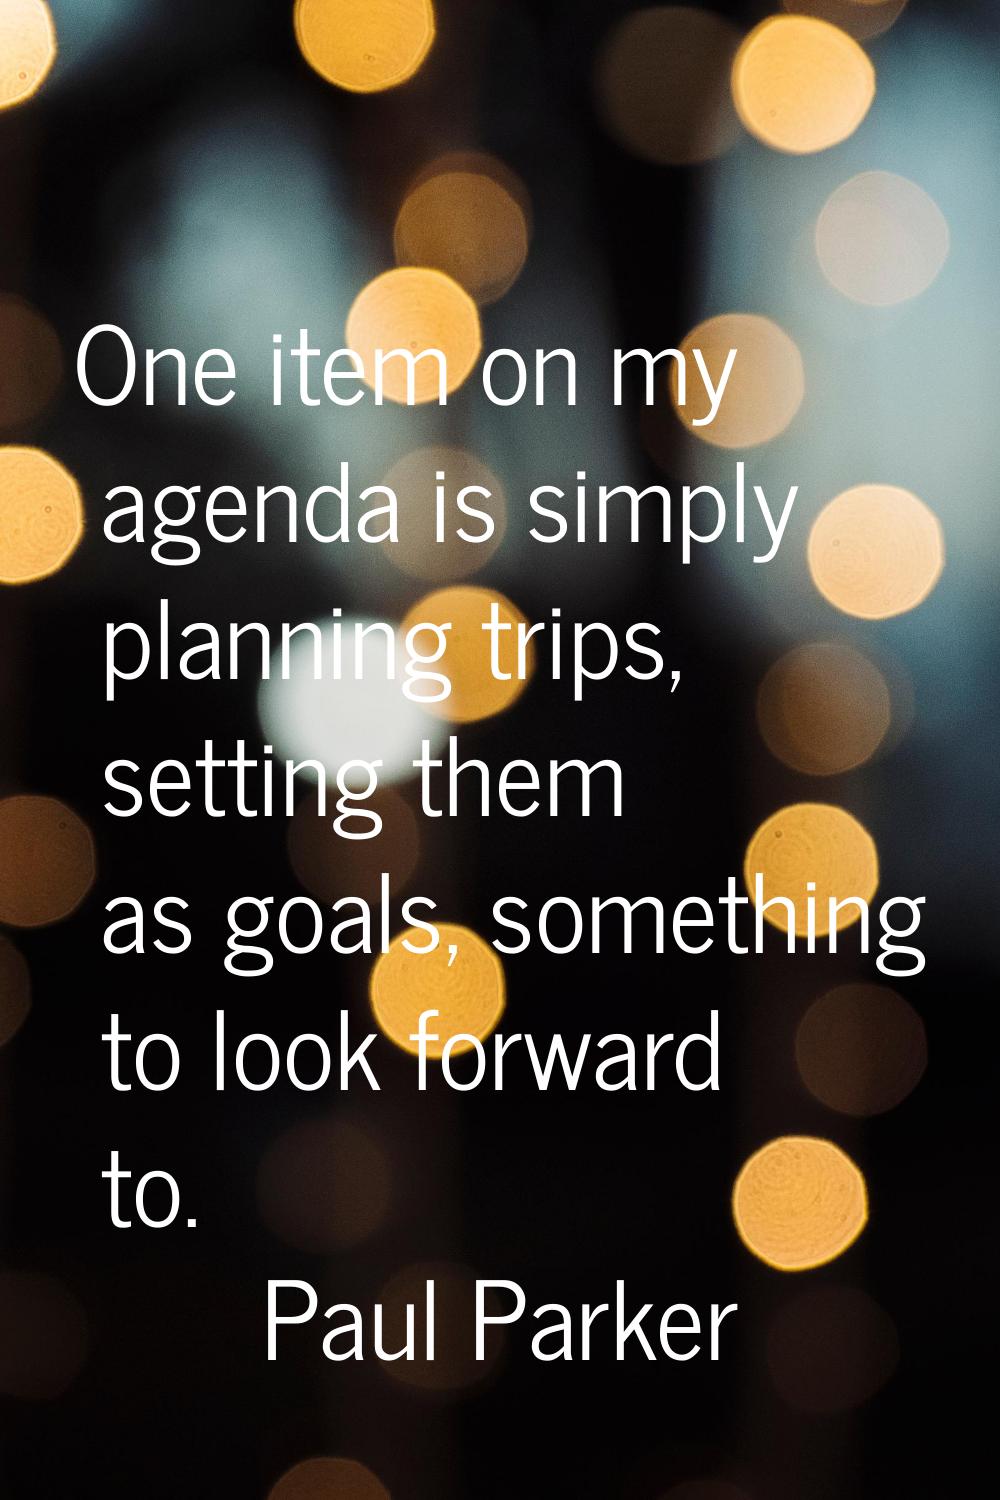 One item on my agenda is simply planning trips, setting them as goals, something to look forward to